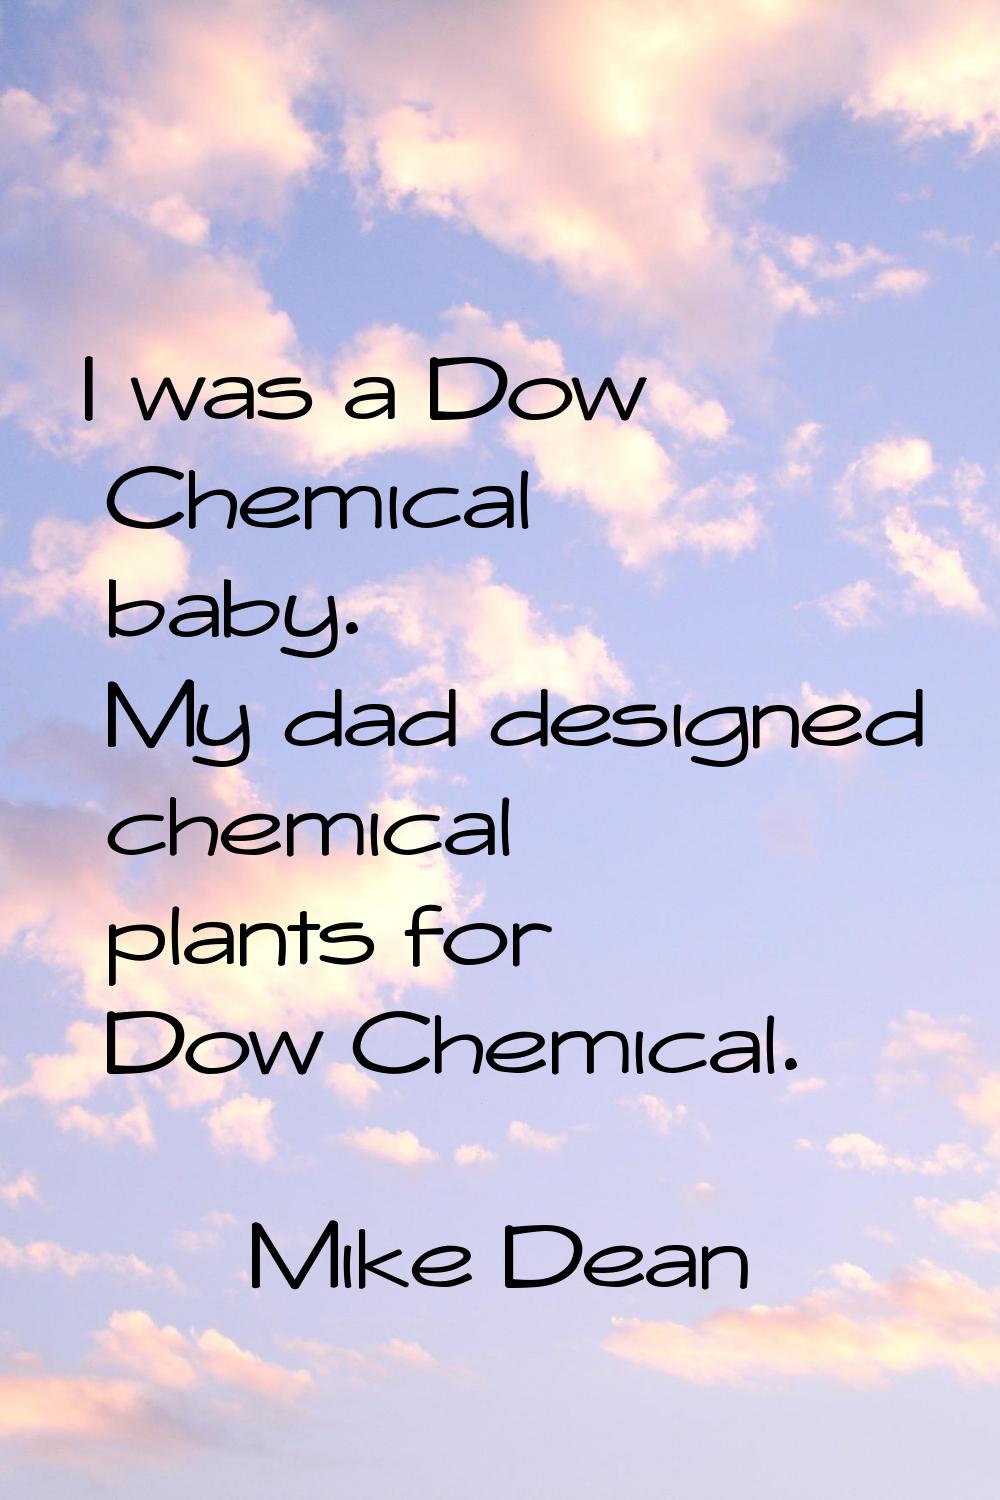 I was a Dow Chemical baby. My dad designed chemical plants for Dow Chemical.